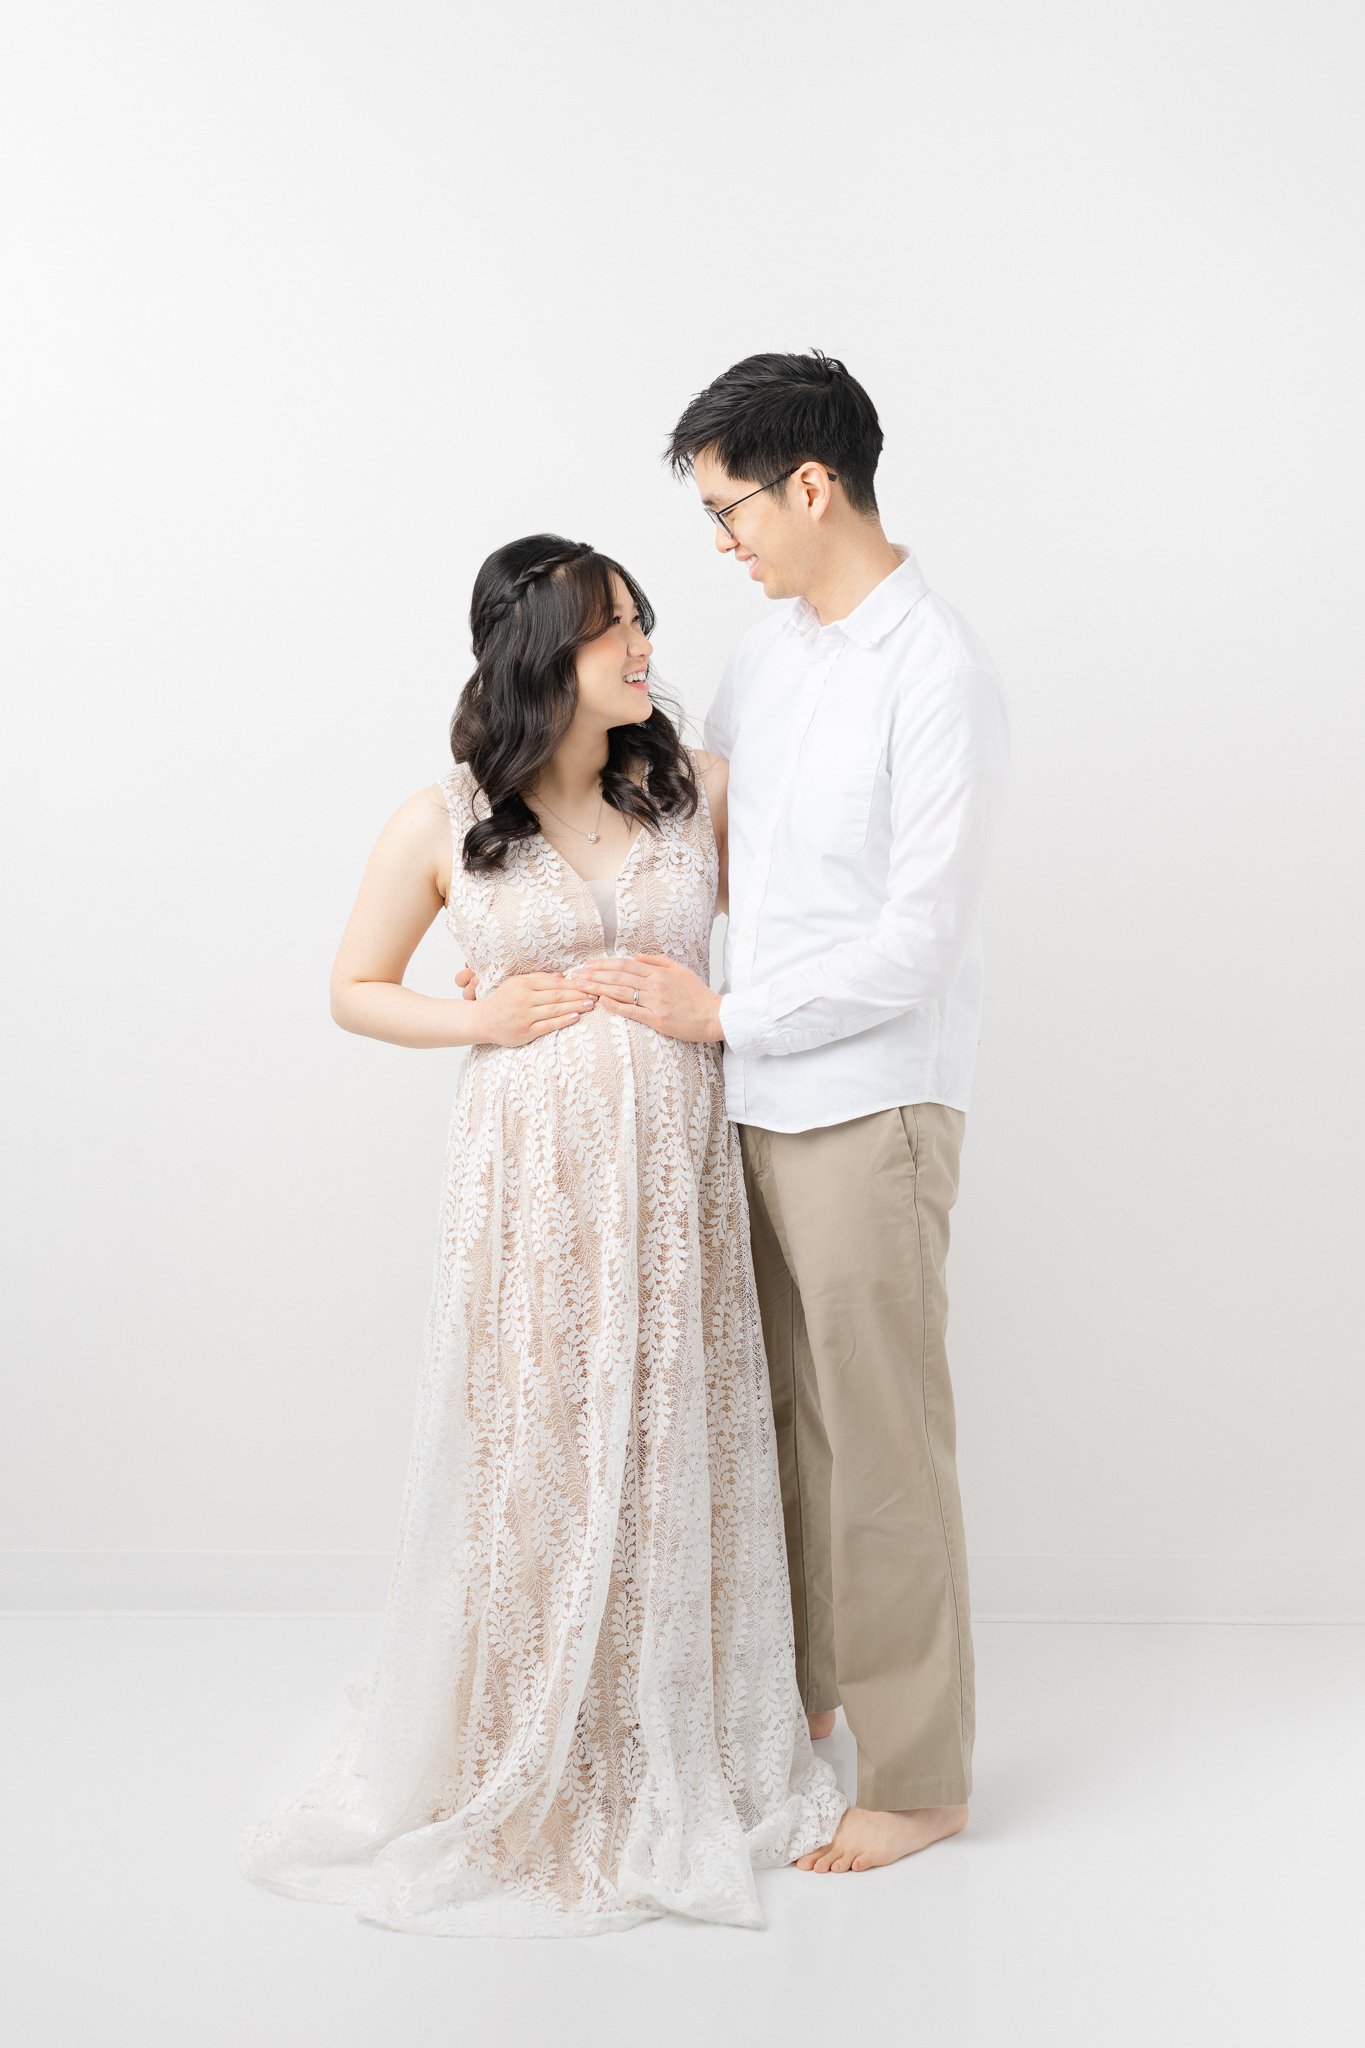  Classy family portraits were taken at a studio before the baby comes by Nicole Hawkins Photography. family of two baby on the way simple #NicoleHawkinsPhotography #NicoleHawkinsMaternity #MaternityPhotography #Maternitystyle #NJMaternity #TimelessPo